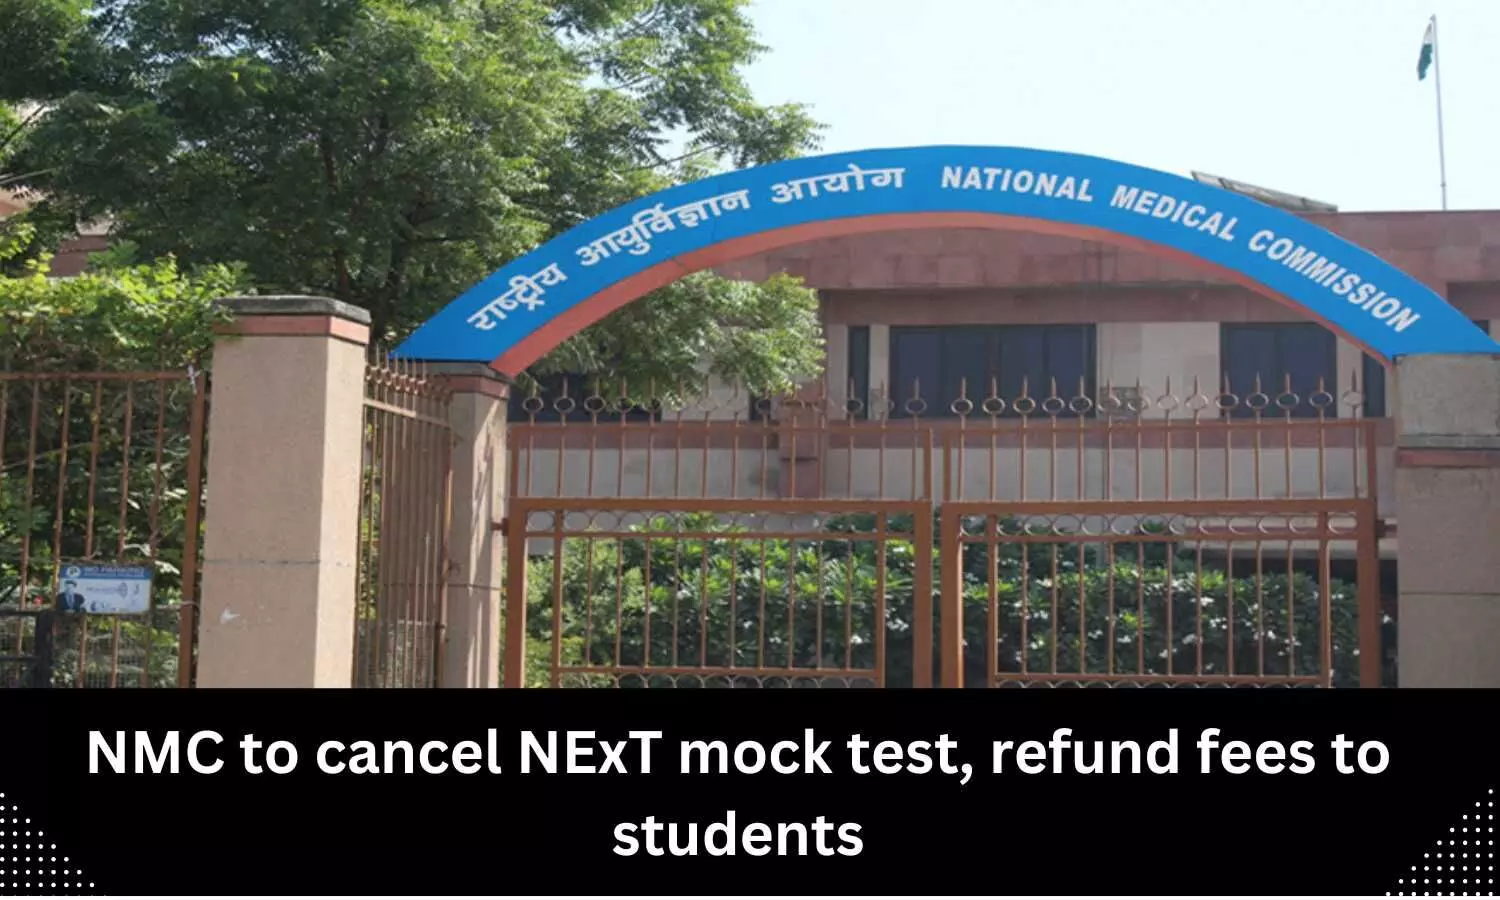 NMC to cancel mock test for NExT